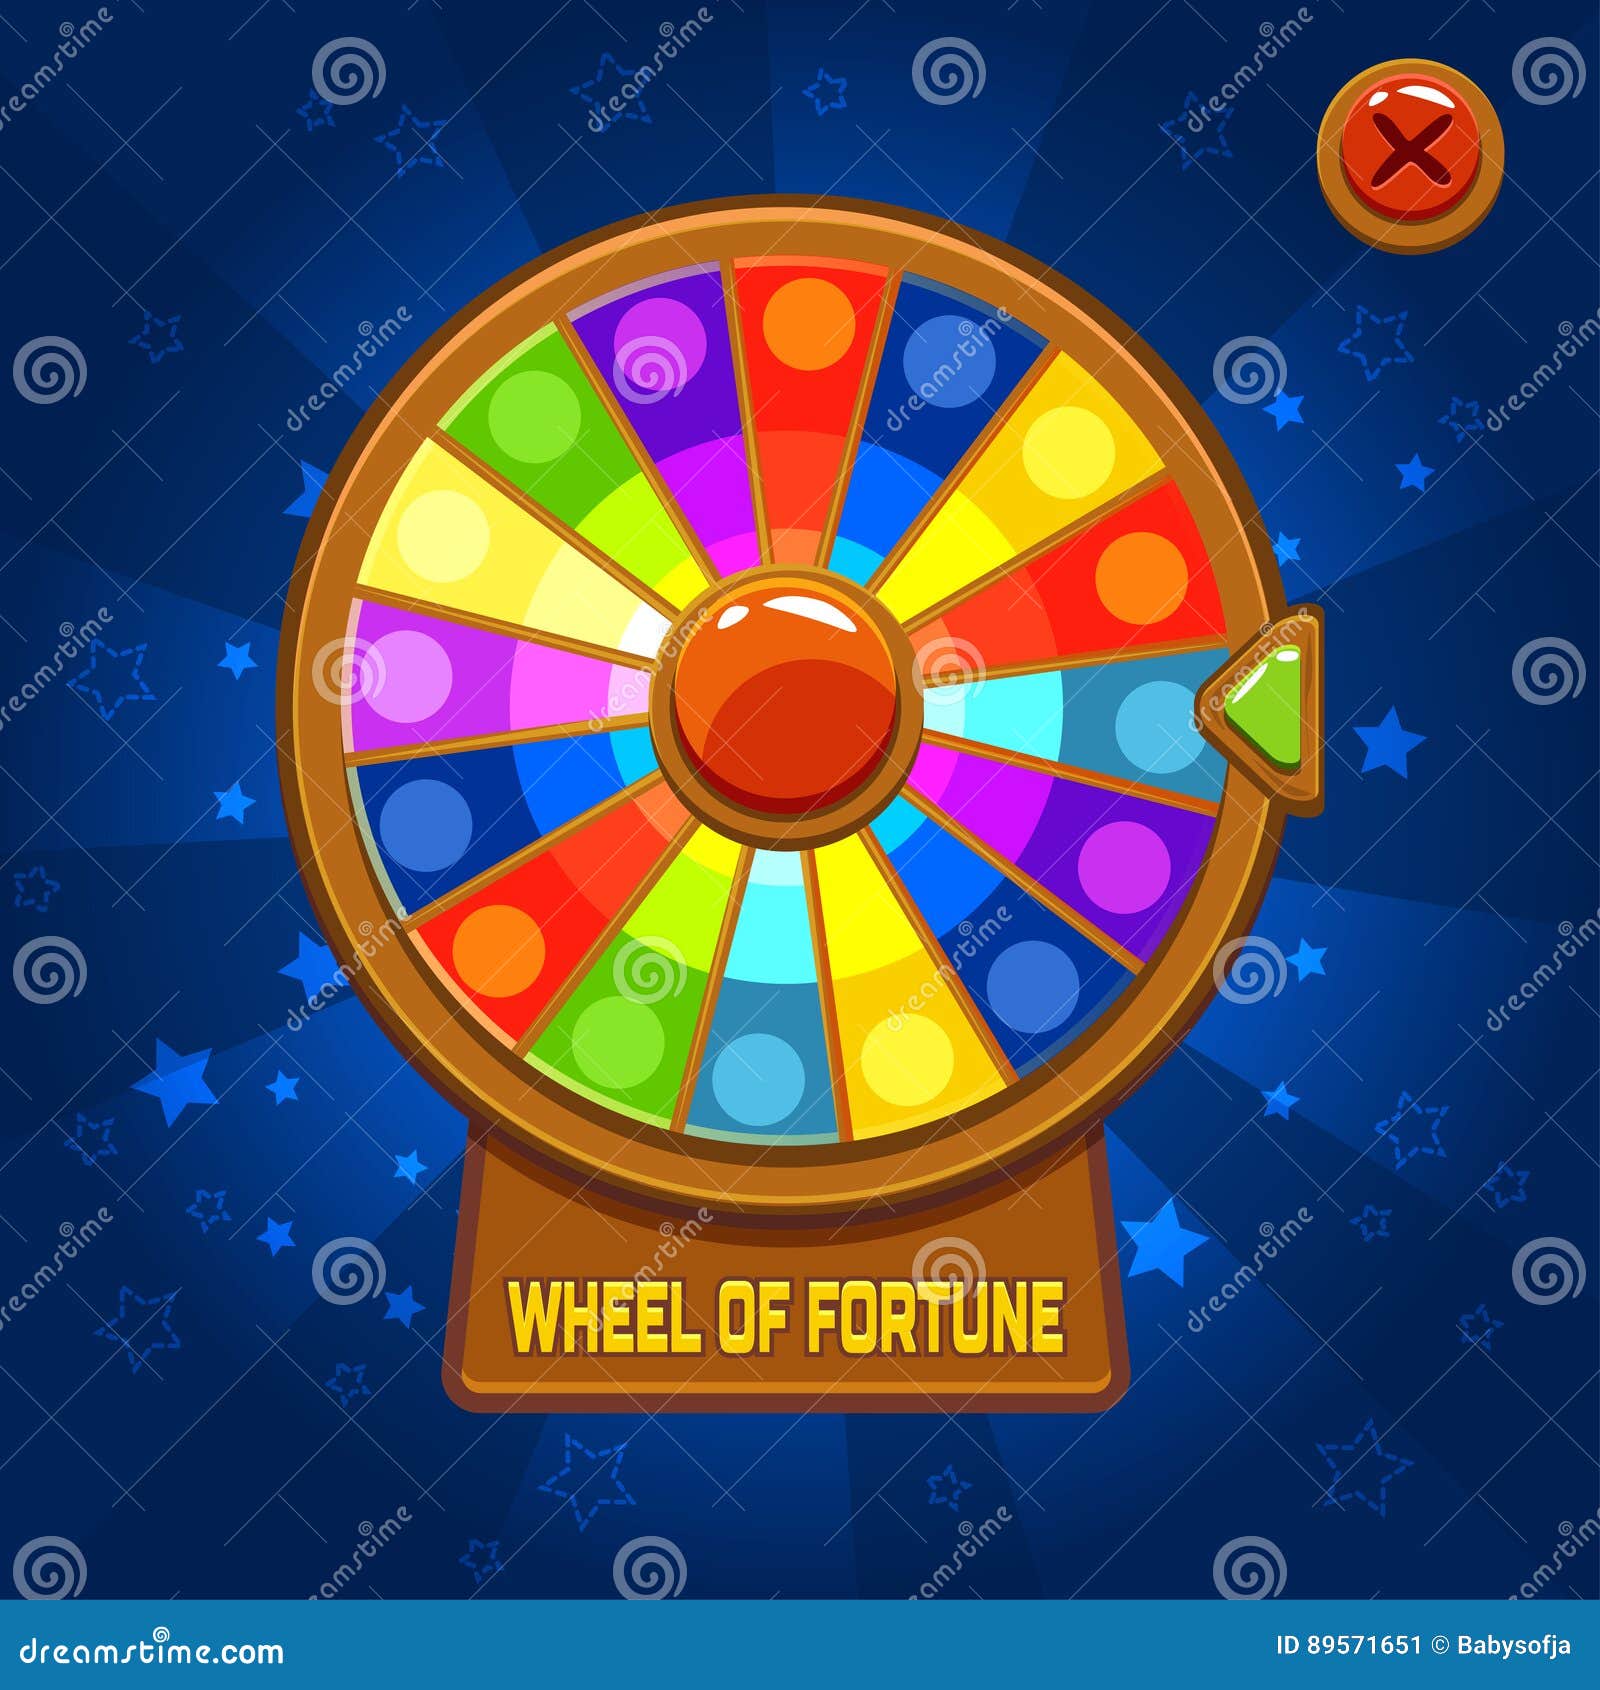 wheel of fortune for ui game